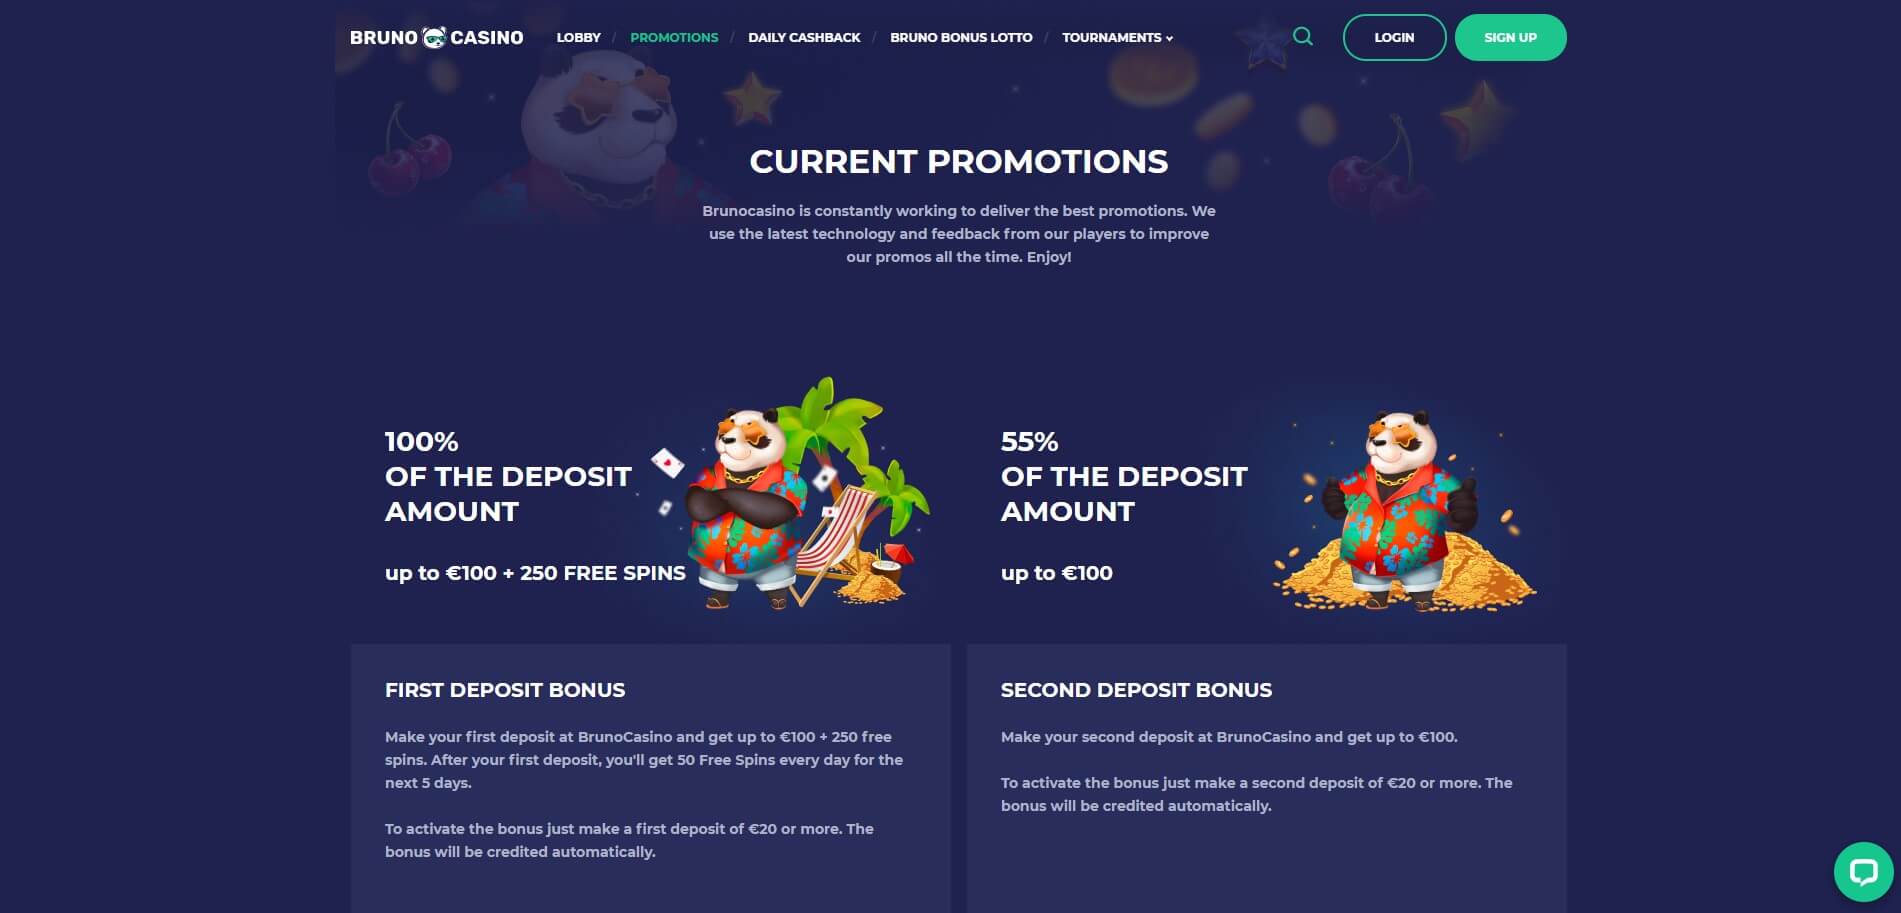 Promotions at Bruno Casino